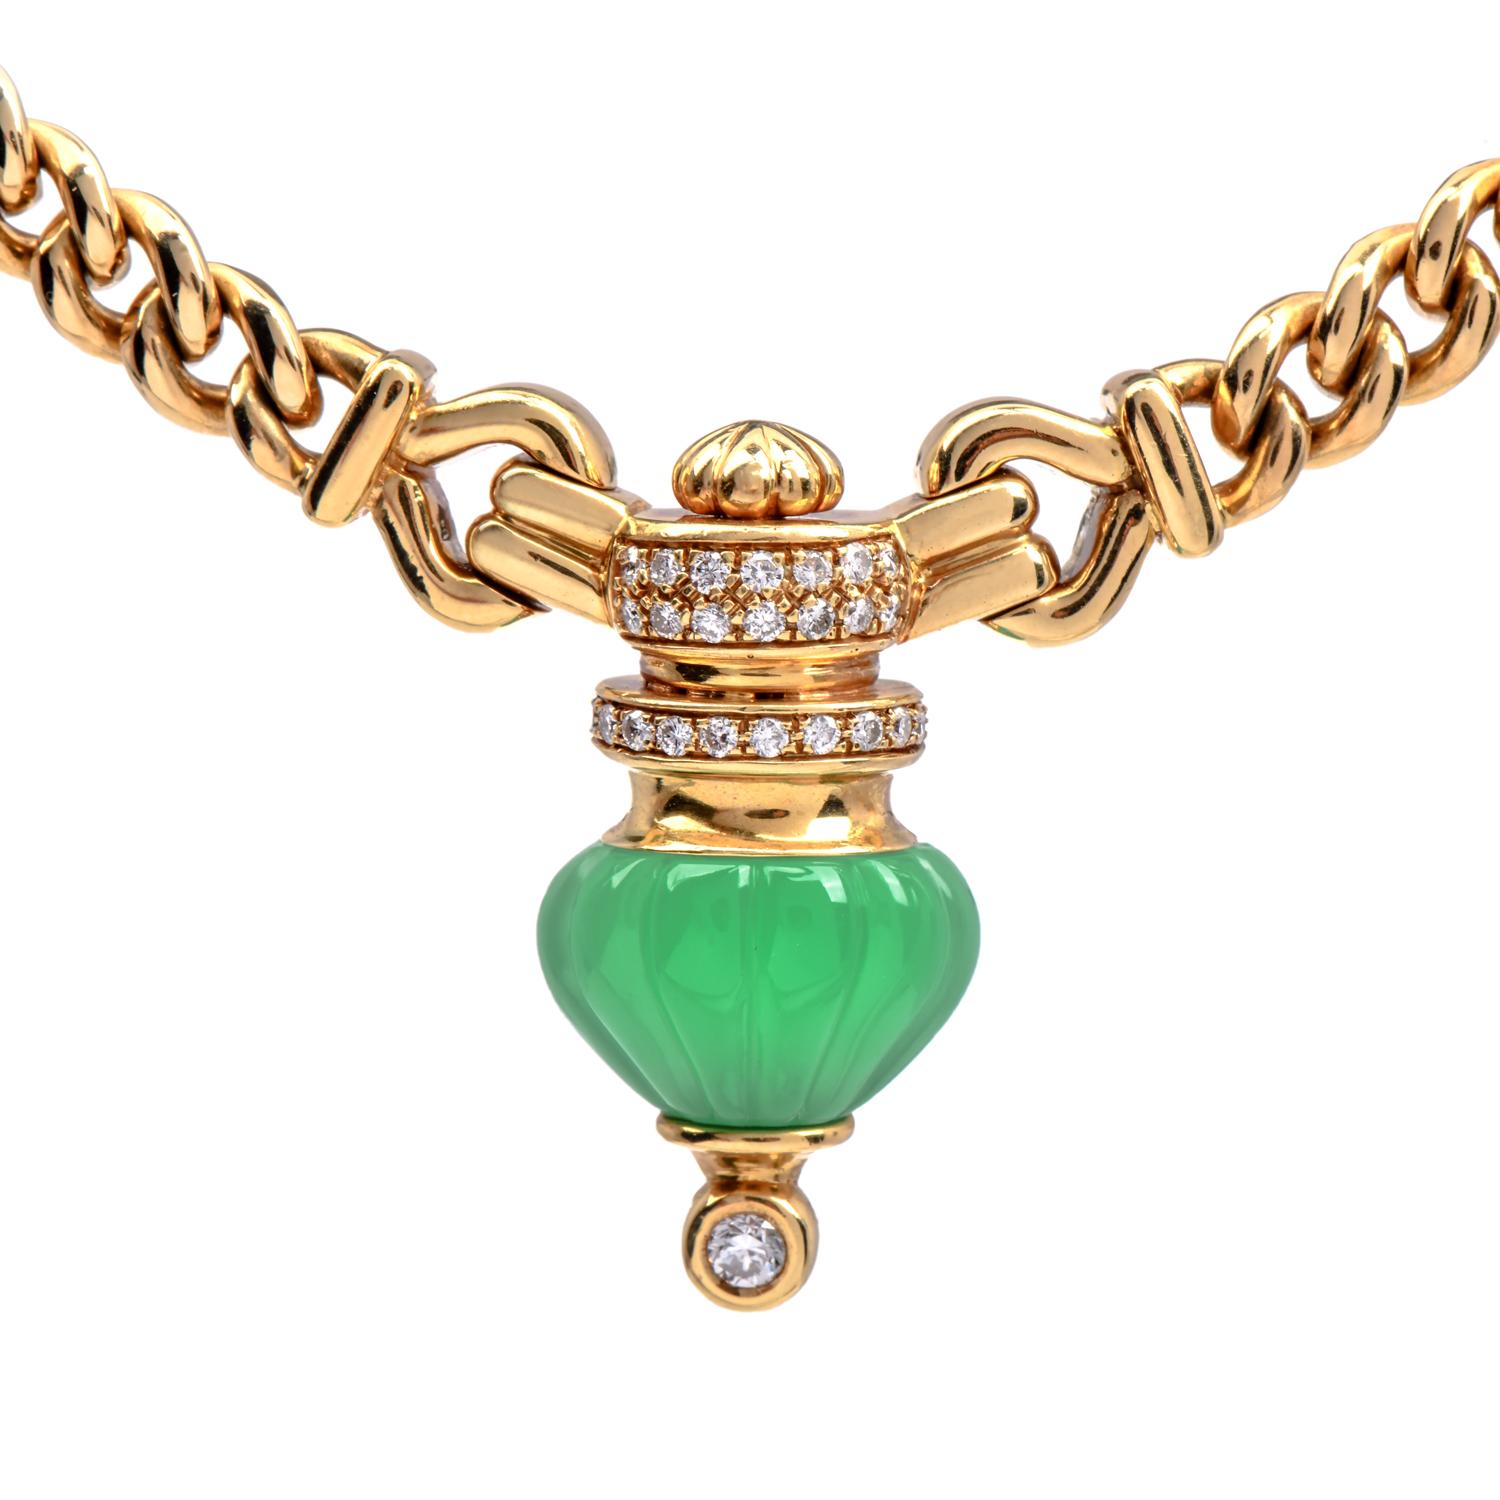 Presenting a gorgeous one of its kind pendant collar necklace crafted in 18K solid Yellow gold features a Chrysoprase pendant scallop pattern carved design meticulously adorned with diamonds. Serving as a striking centerpiece, the pendant is